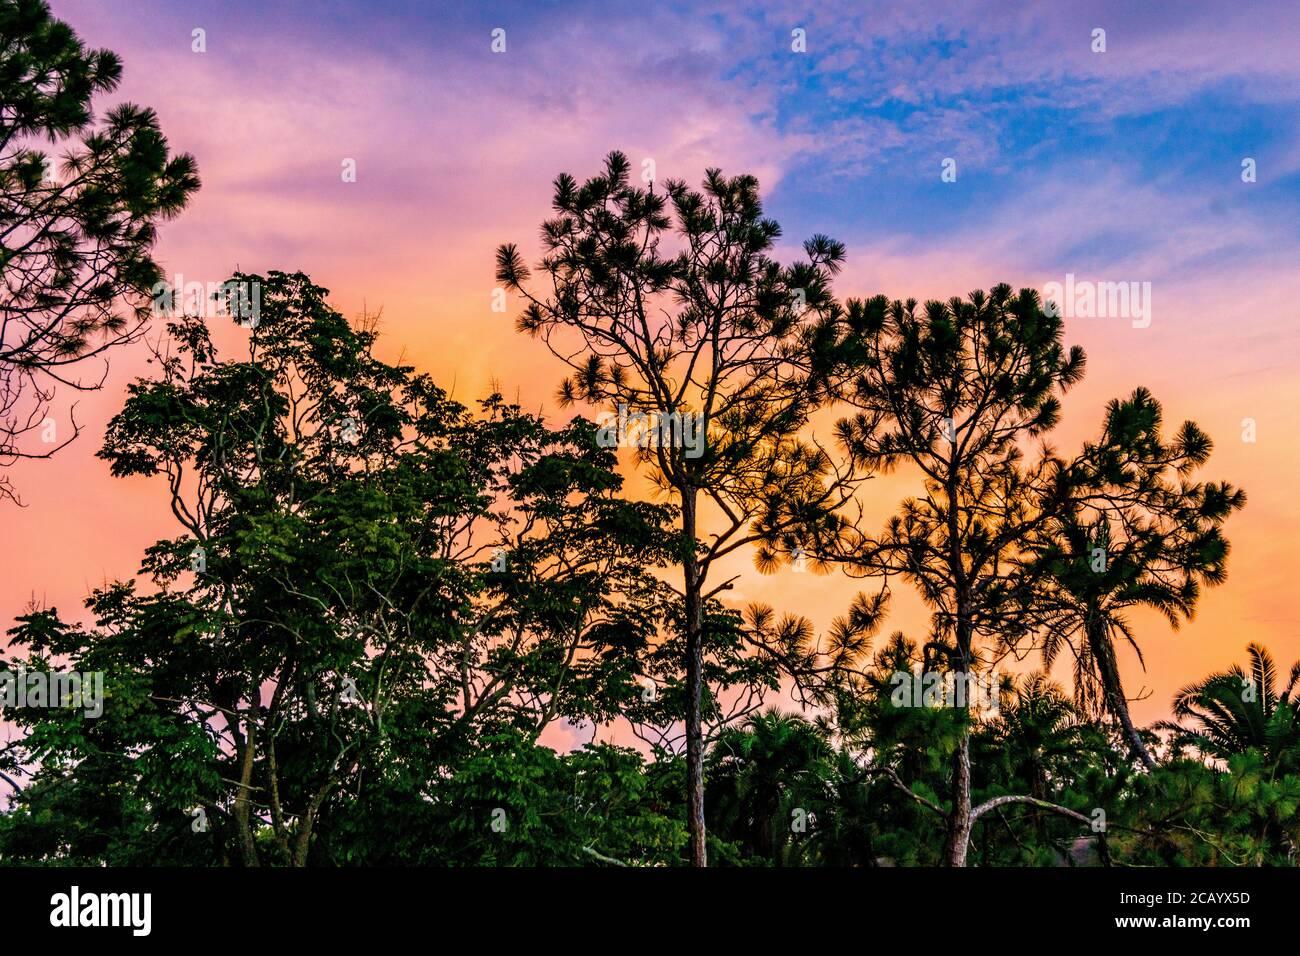 Sarasota, USA, 9 August 2020. Trees against a colorful sky at sunset in The Meadows, Sarasota, Florida.  Credit:  Enrique Shore/Alamy Stock Photo Stock Photo